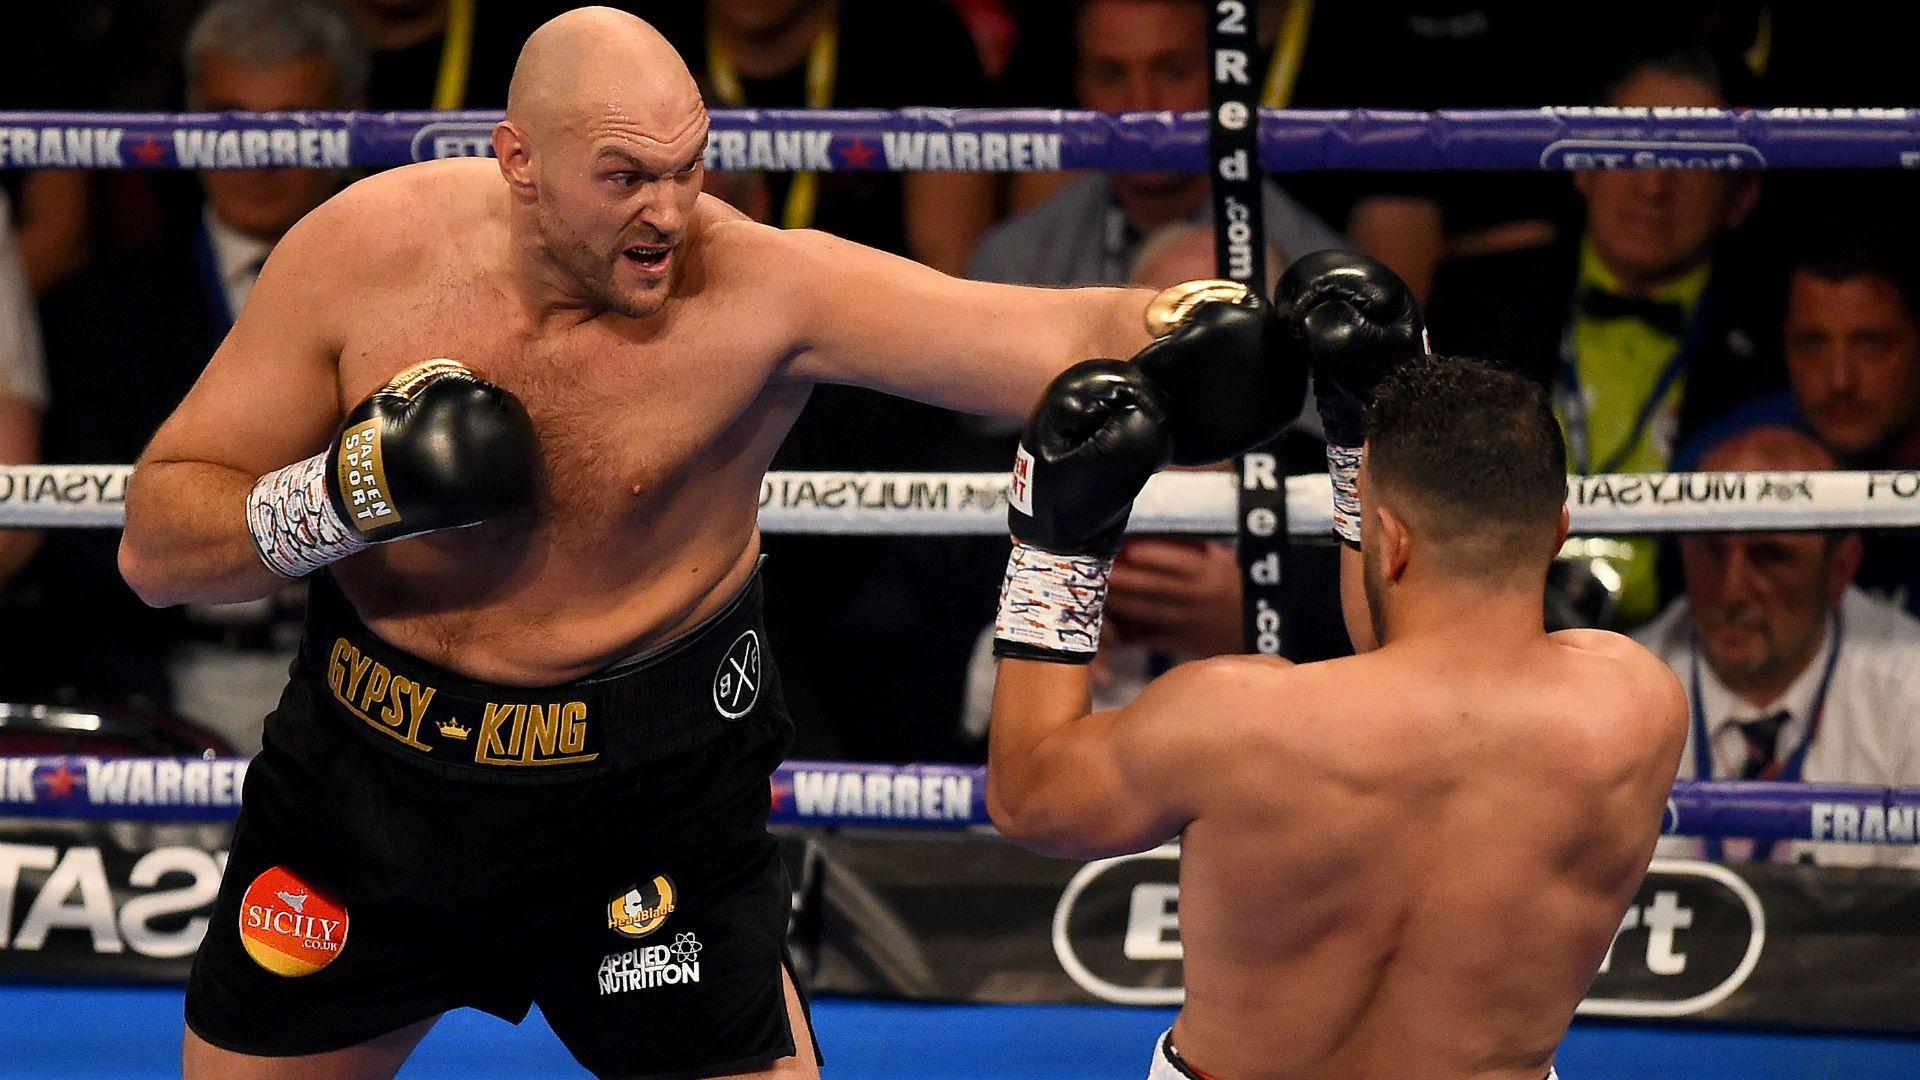 Tyson Fury recorded victory on his comeback to boxing